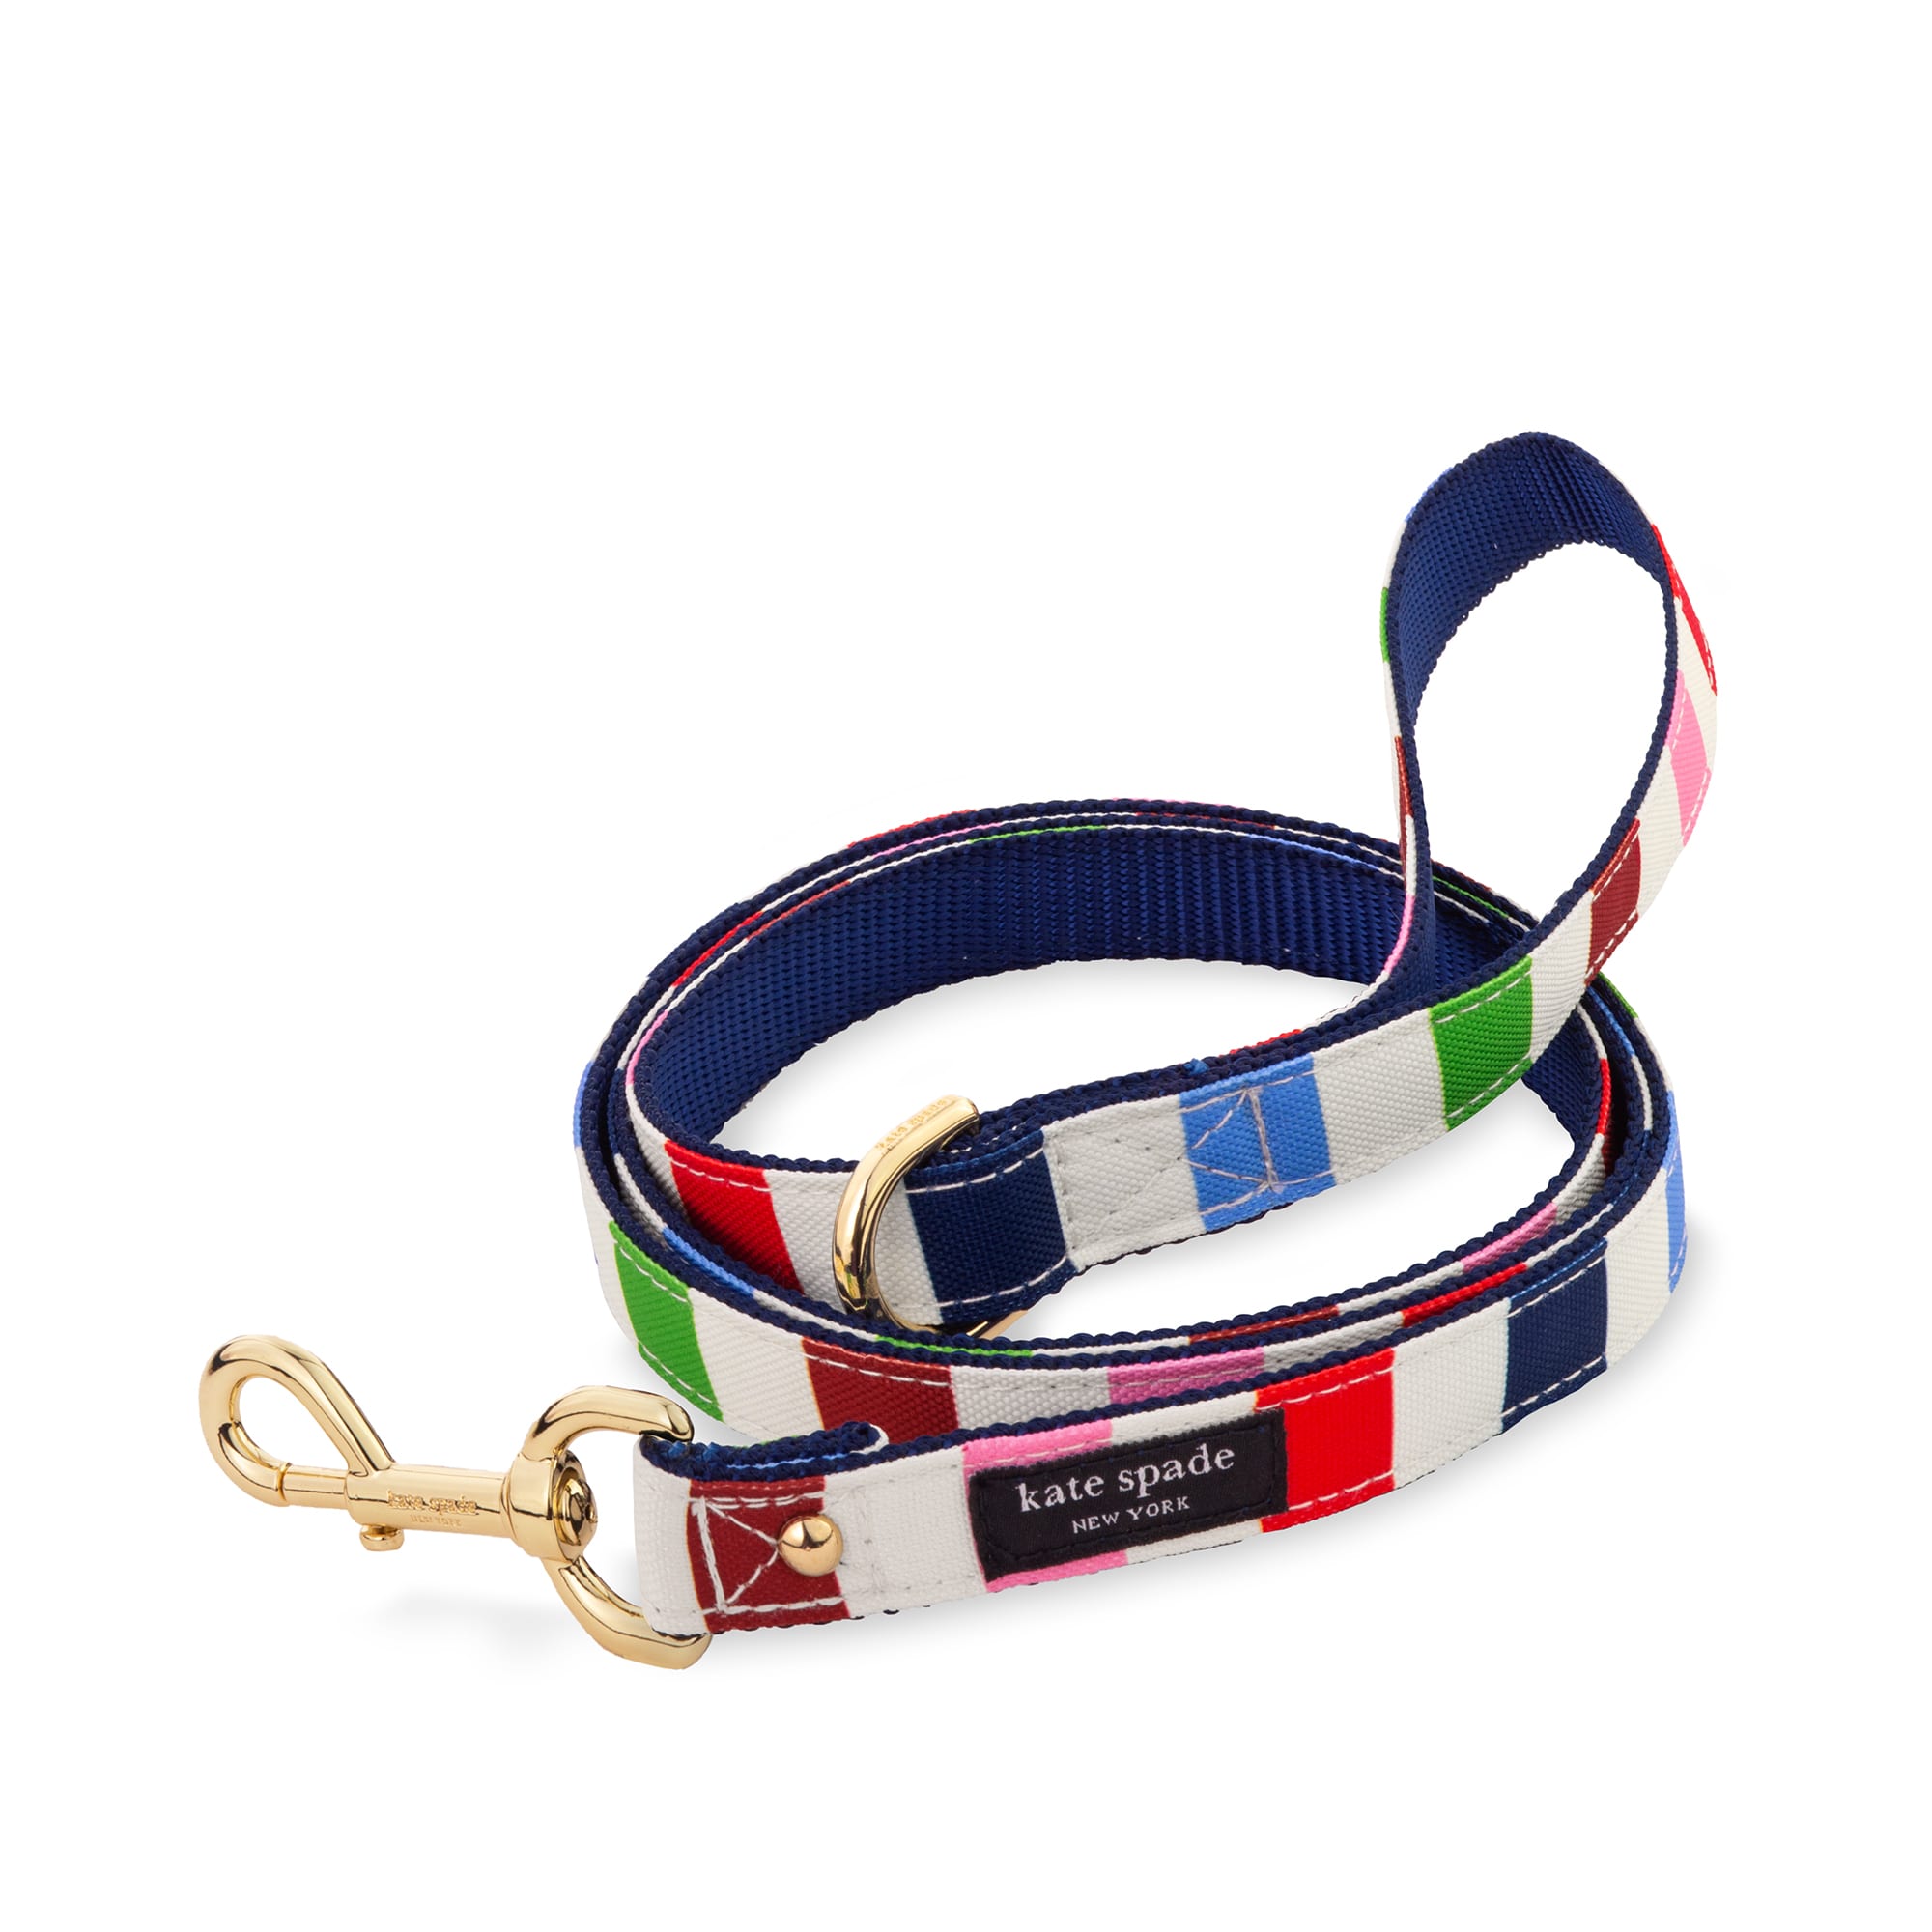  Kate Spade New York Heavy Duty Leash for Female or Male Dogs,  Cute Pet Leash with Gold Metal Hardware, Long Dog Lead for Small Medium  Large Breeds (Large, Adventure Stripe) 